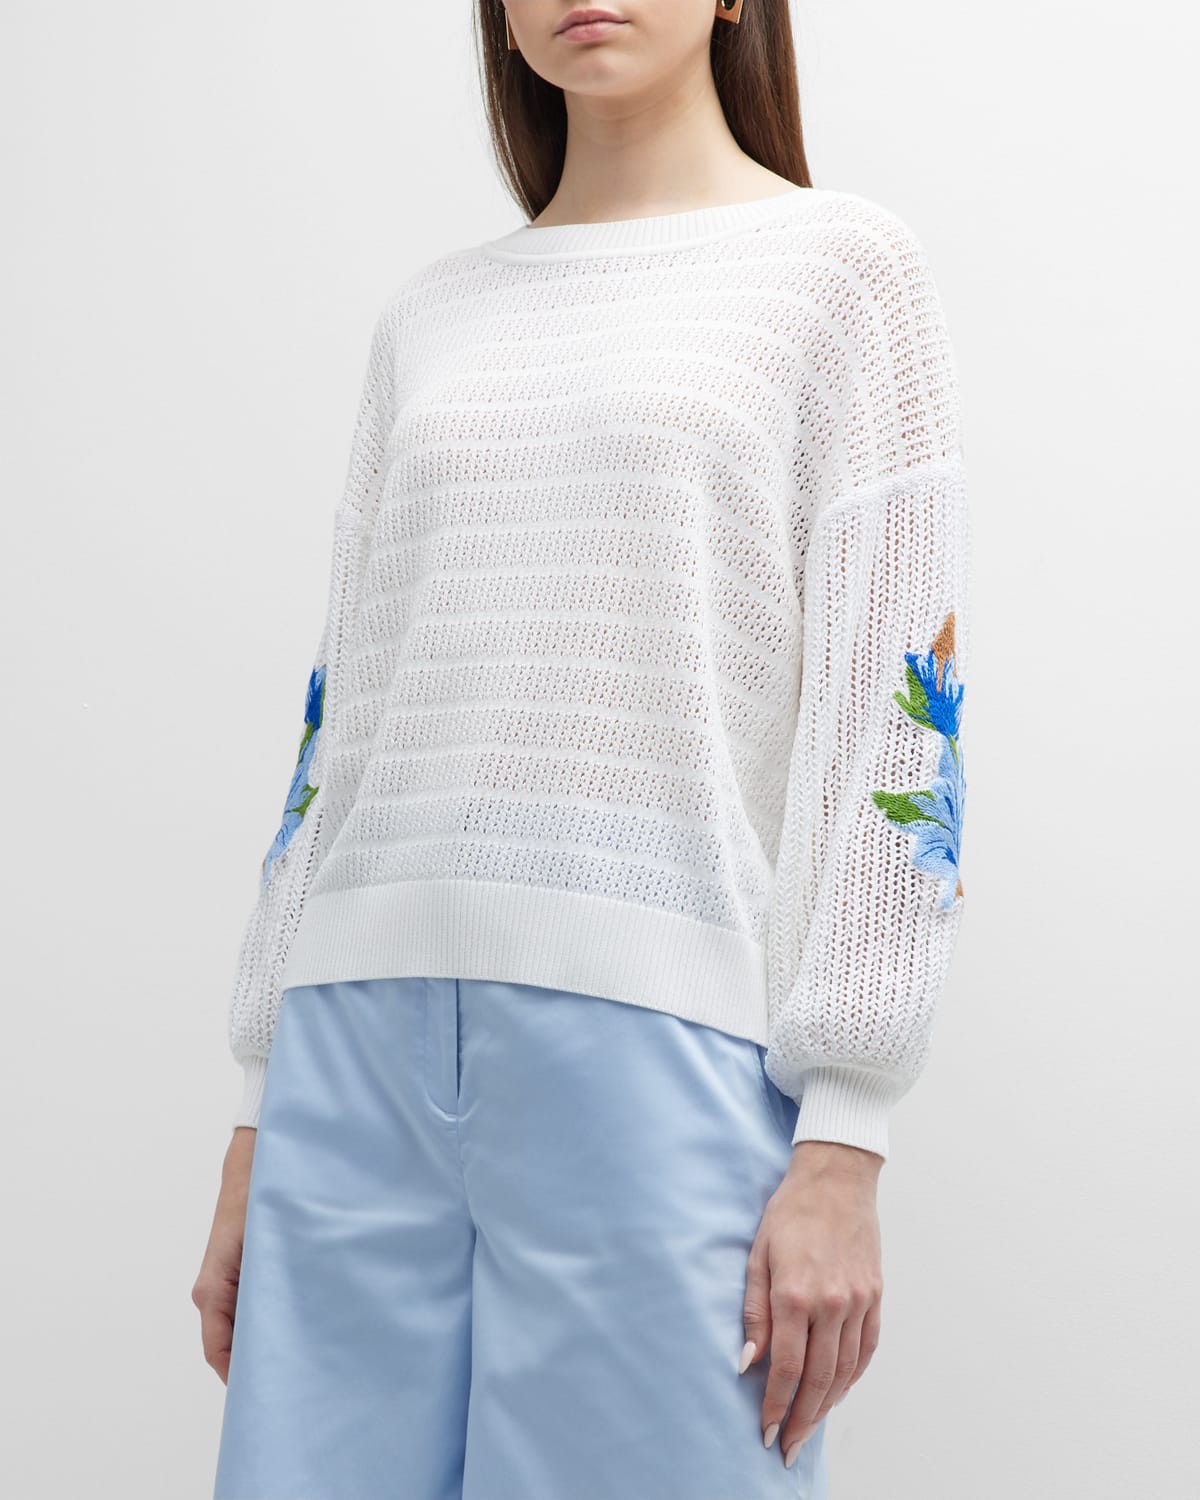 Embroidered Pointelle Knit Sweater